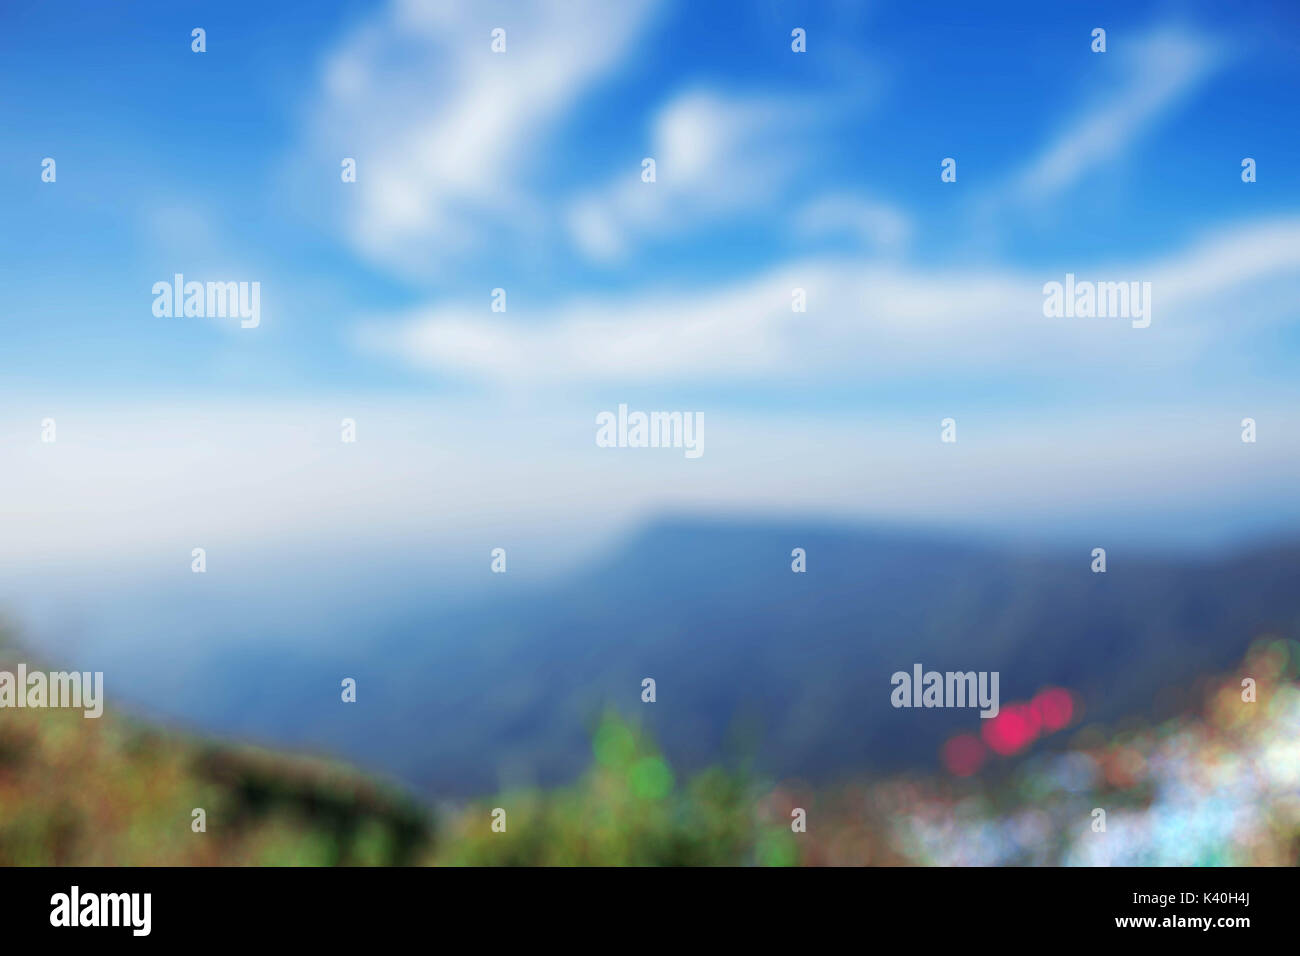 Grass and mountains at blue sky with blurred images. Stock Photo